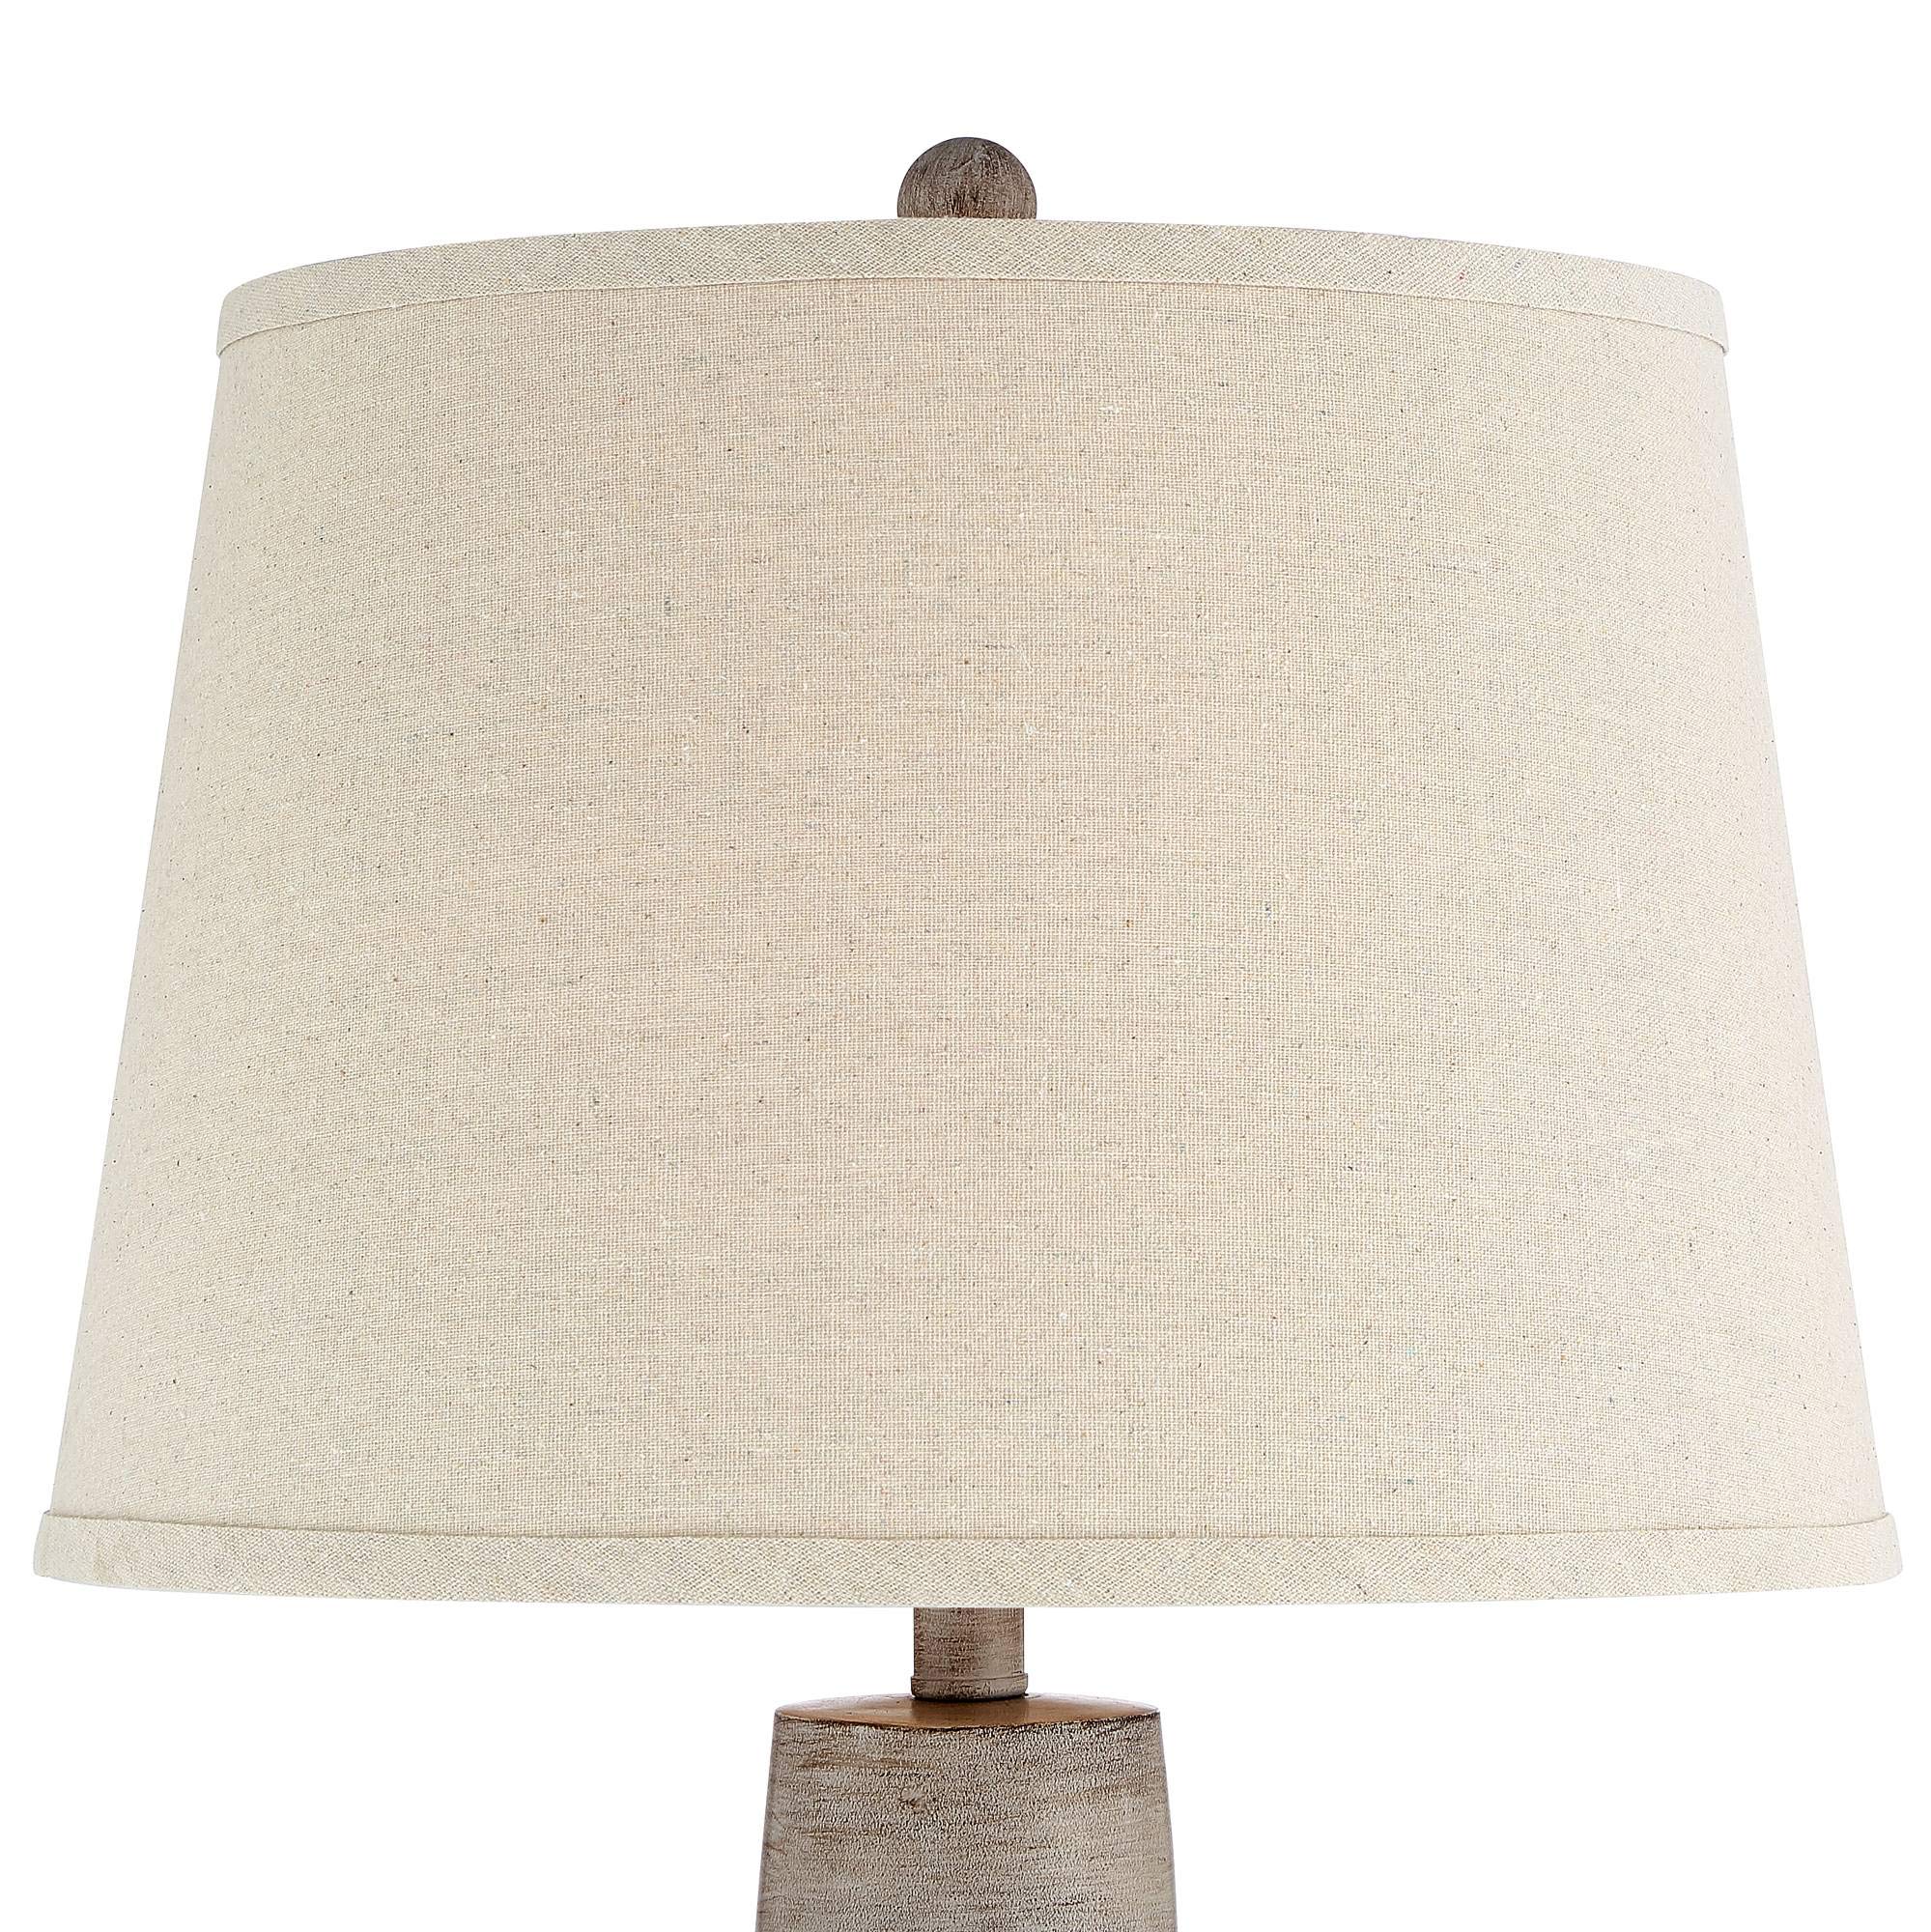 Regency Hill Glenn Rustic Country Cottage Style Table Lamps 27